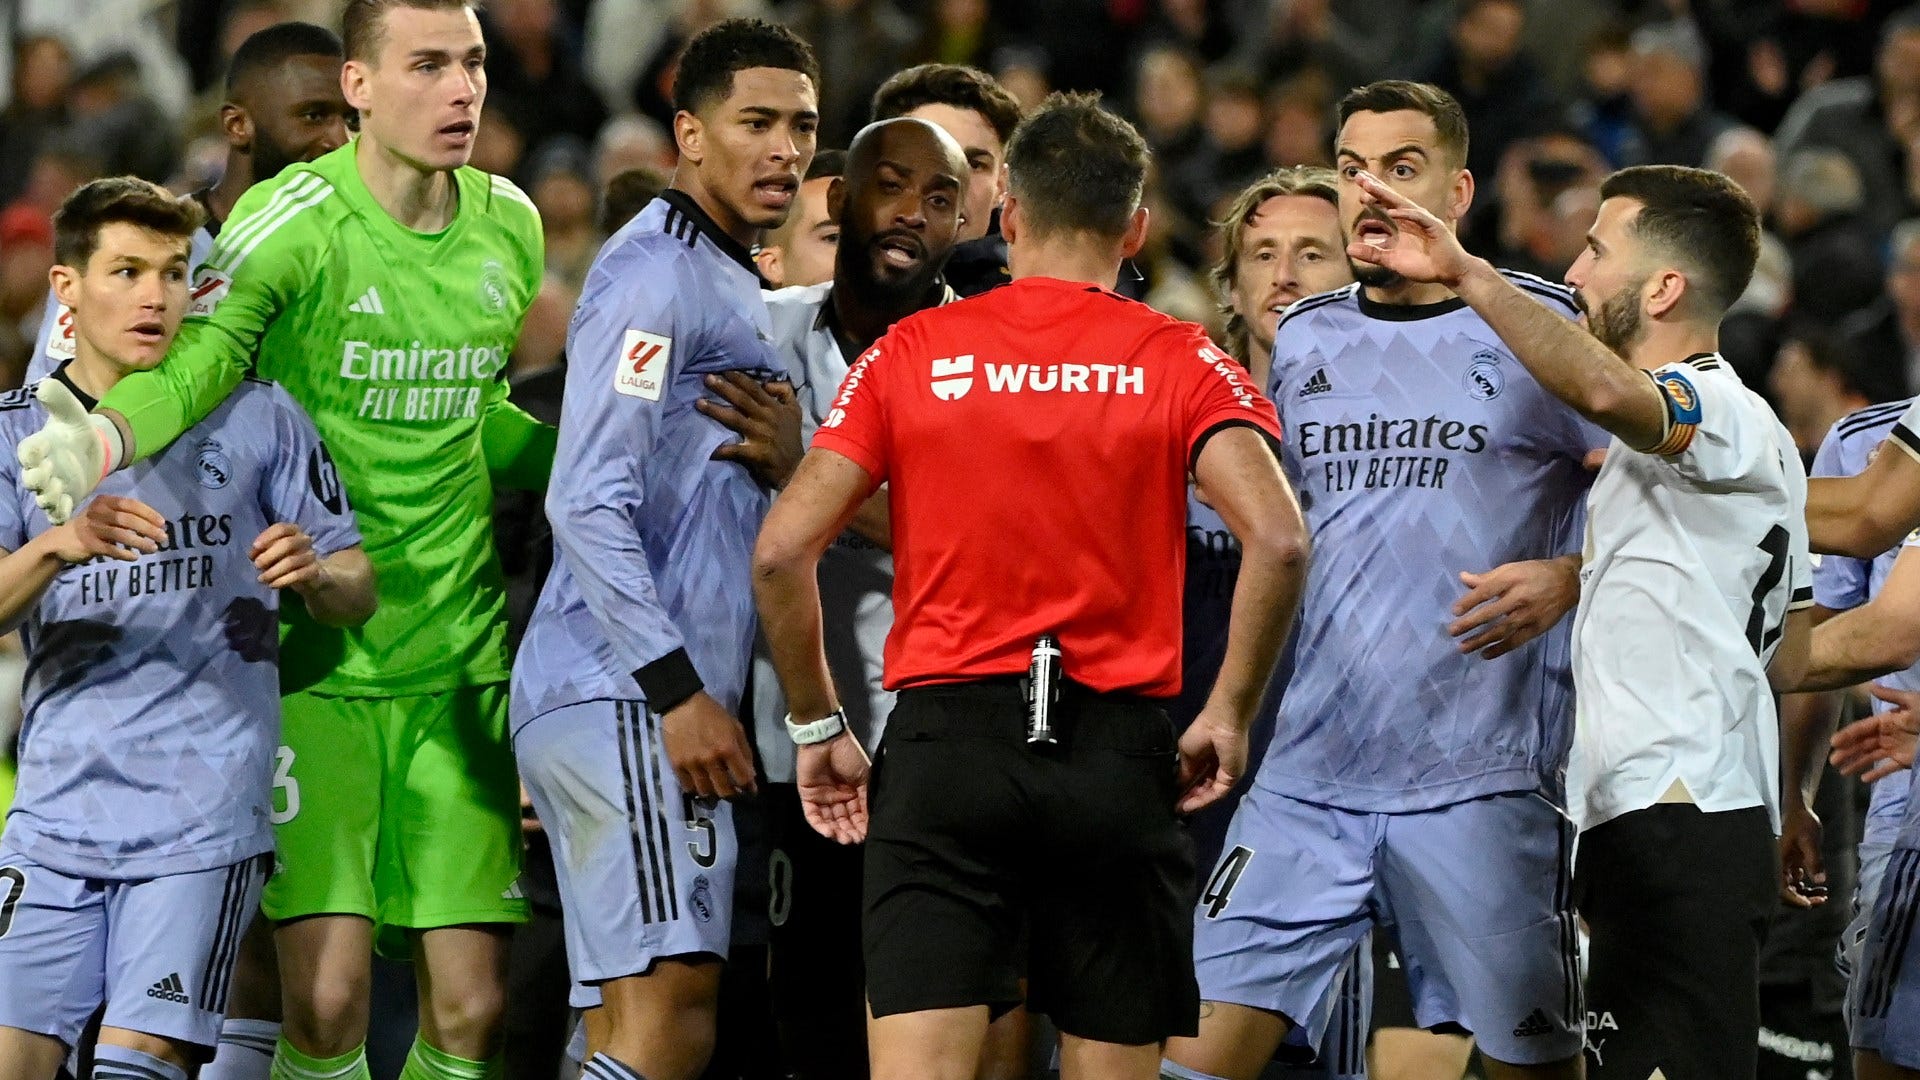 furious jude bellingham sent off for hounding referee after being denied last-minute winner by referee’s full-time whistle - with real madrid players and staff raging at decision